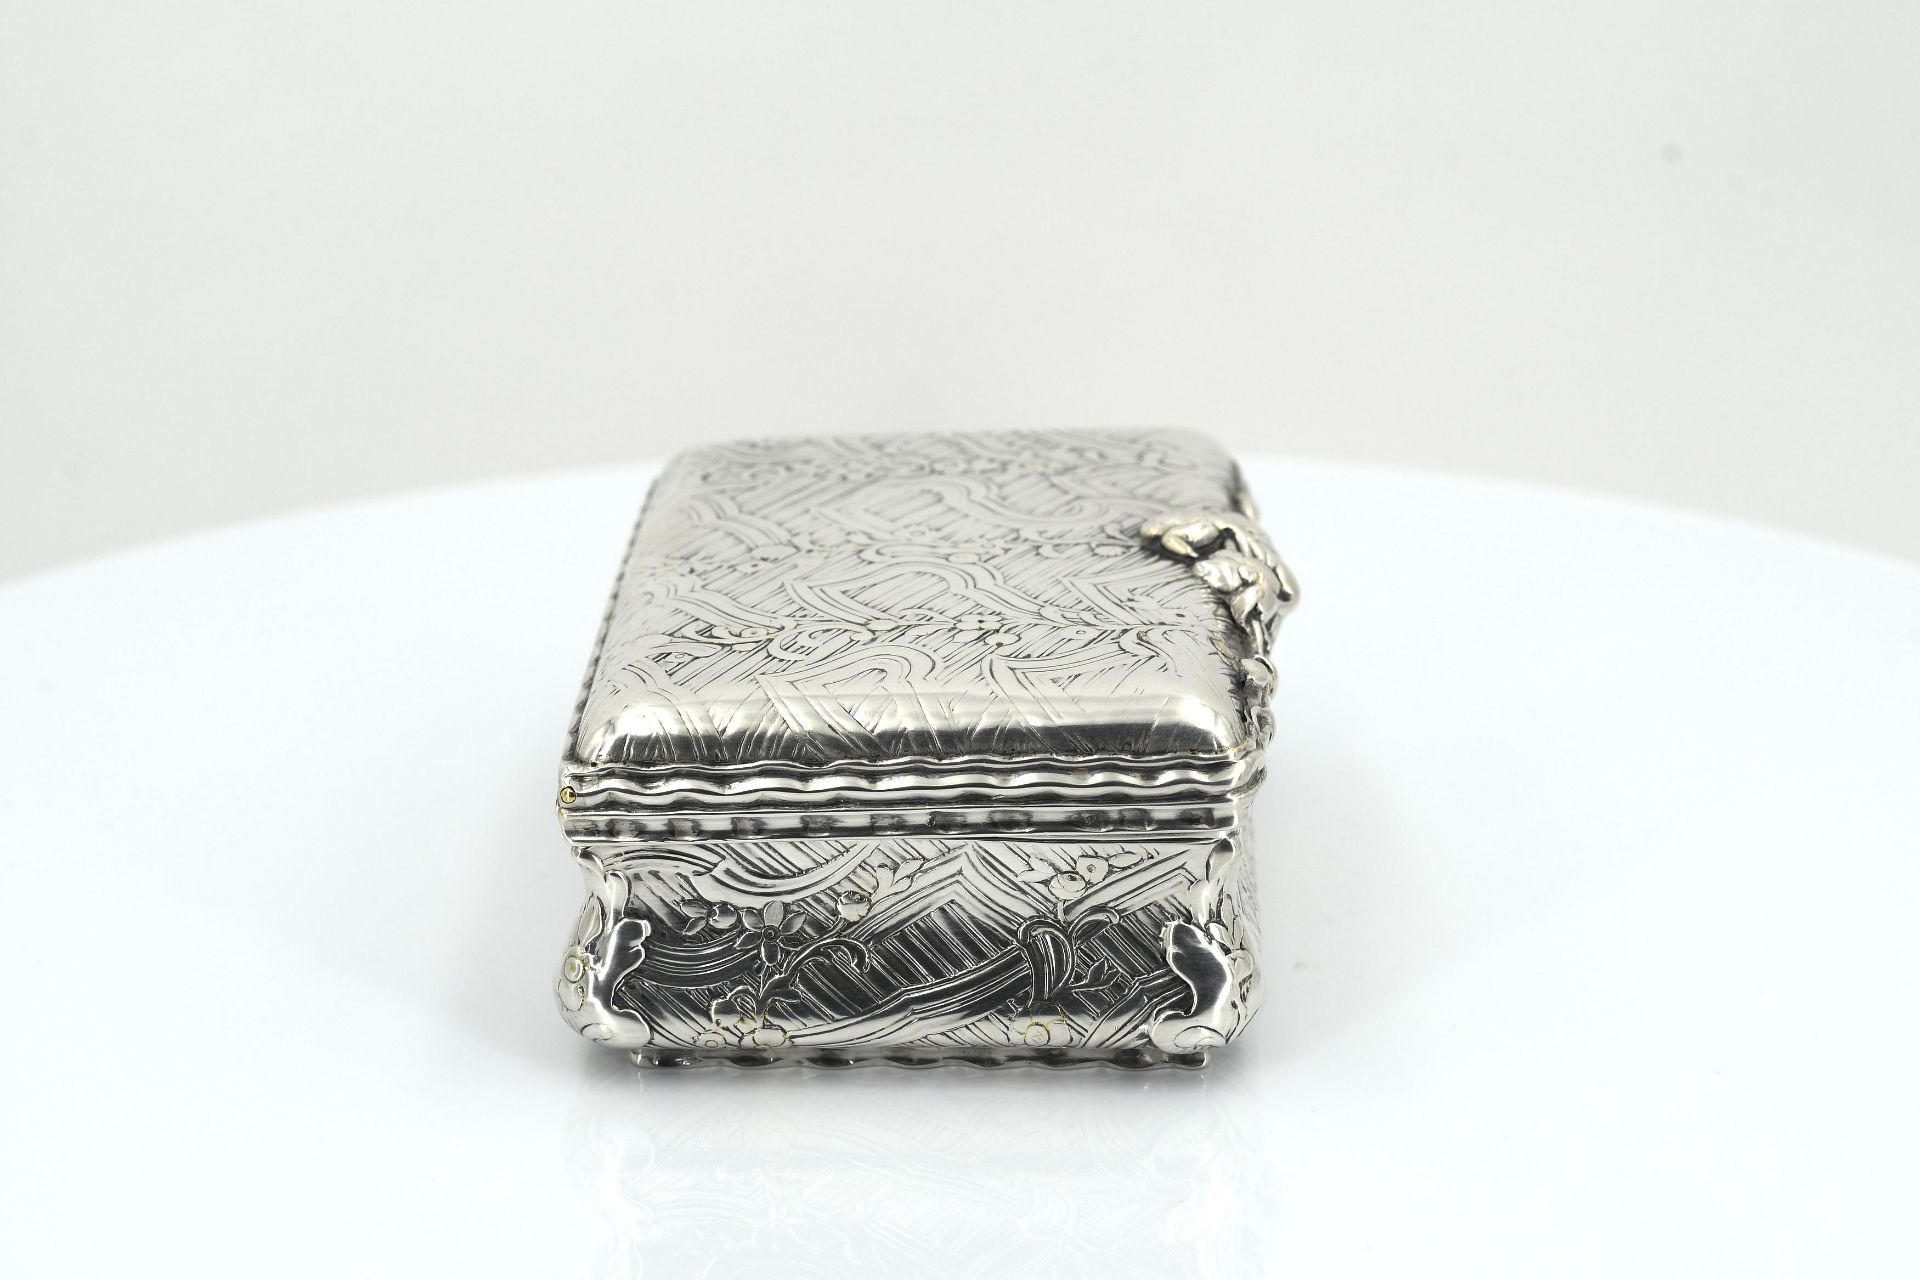 Silver snuffbox with flower tendrils - Image 5 of 9